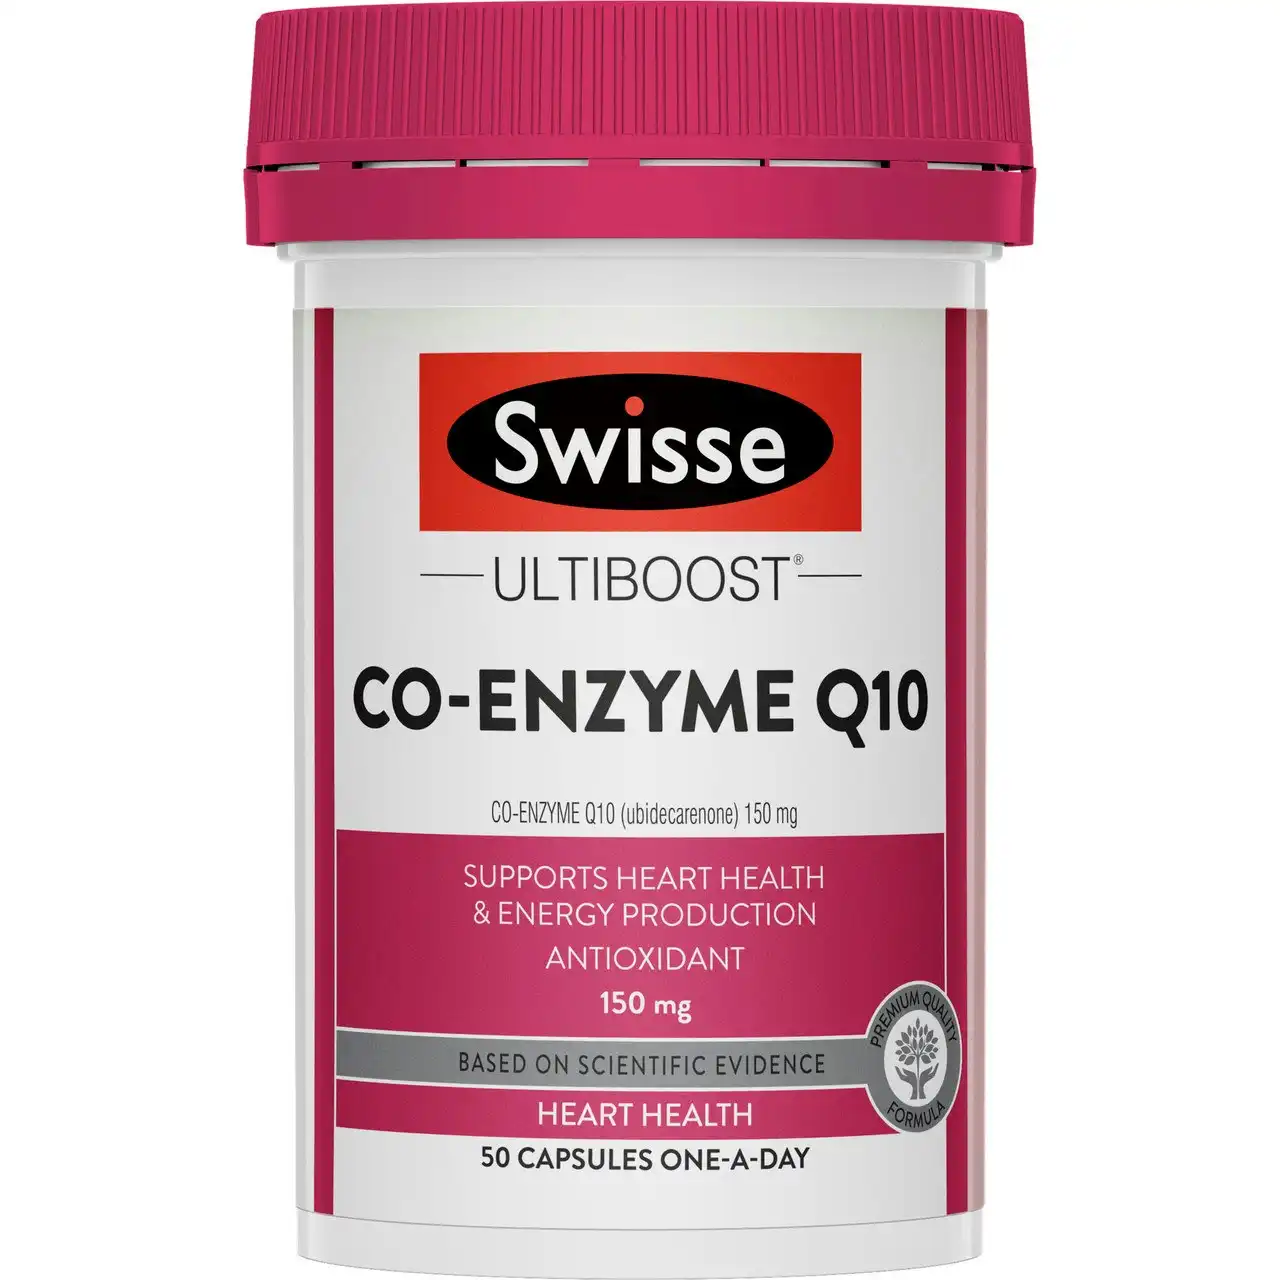 Swisse Ultiboost Co-Enzyme Q10 50 Capsules